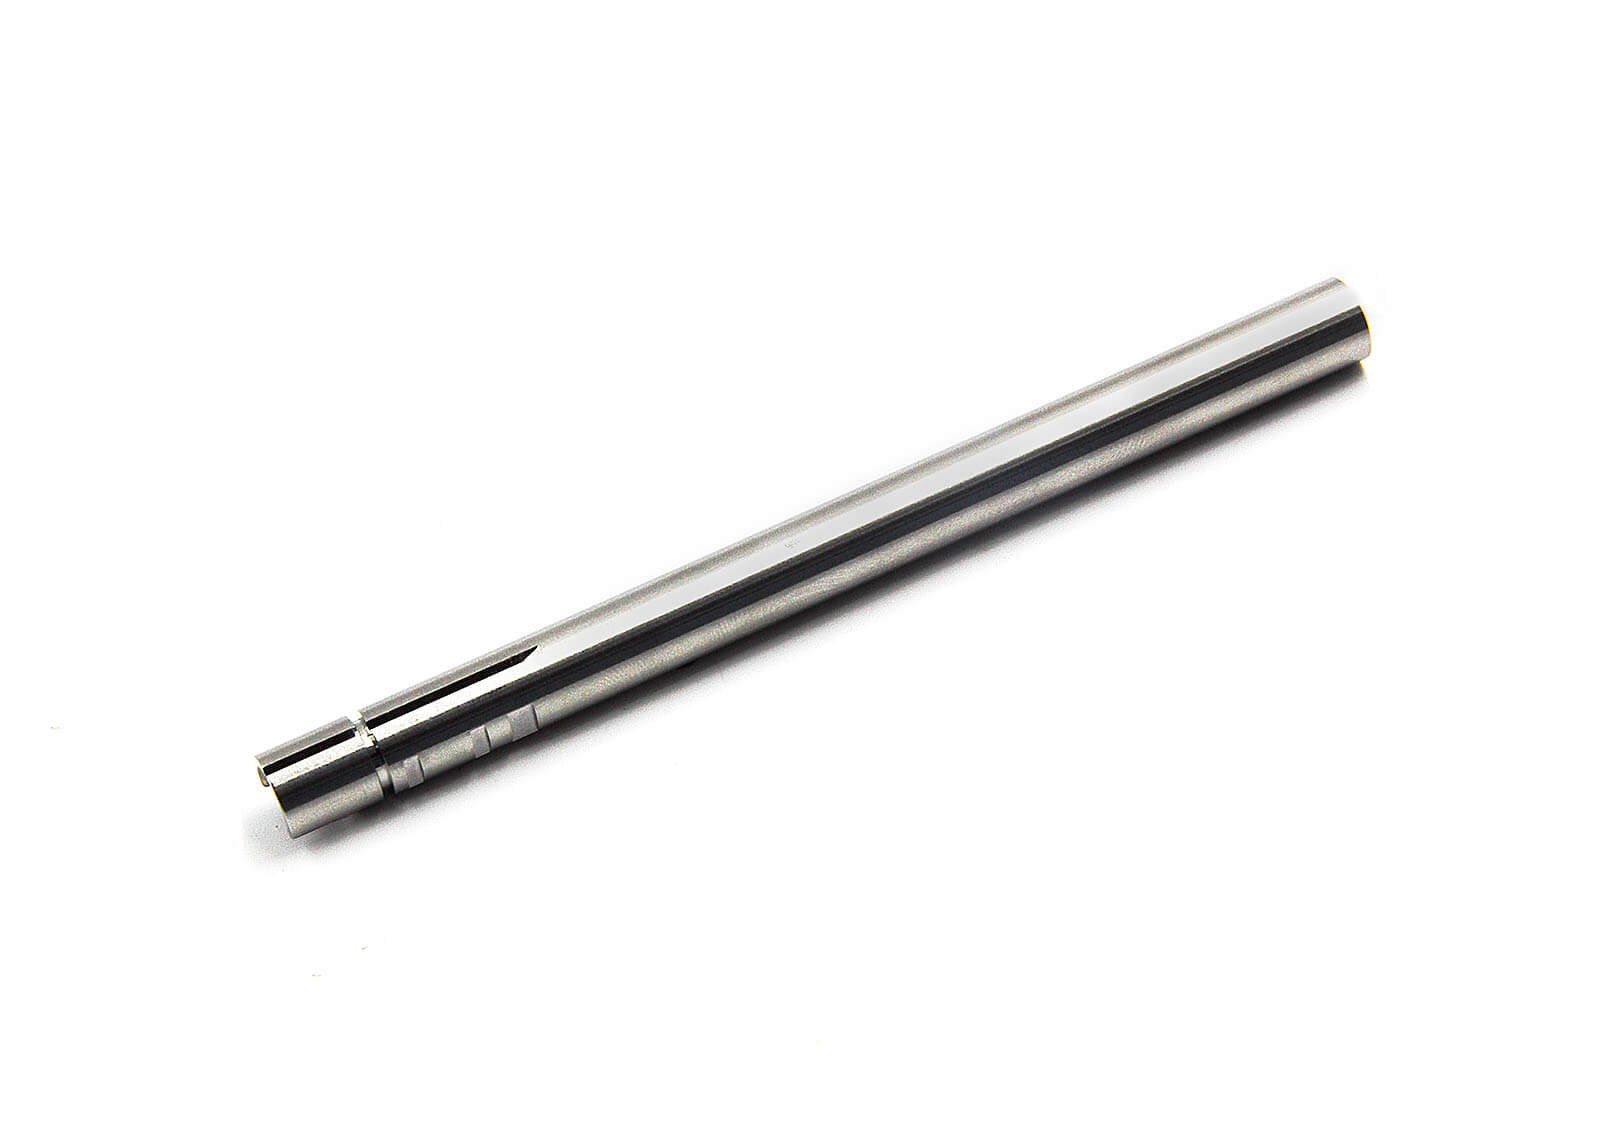 Stainless Steel 6.03mm Precision GBB Inner Barrel 113mm - Modify Airsoft Parts